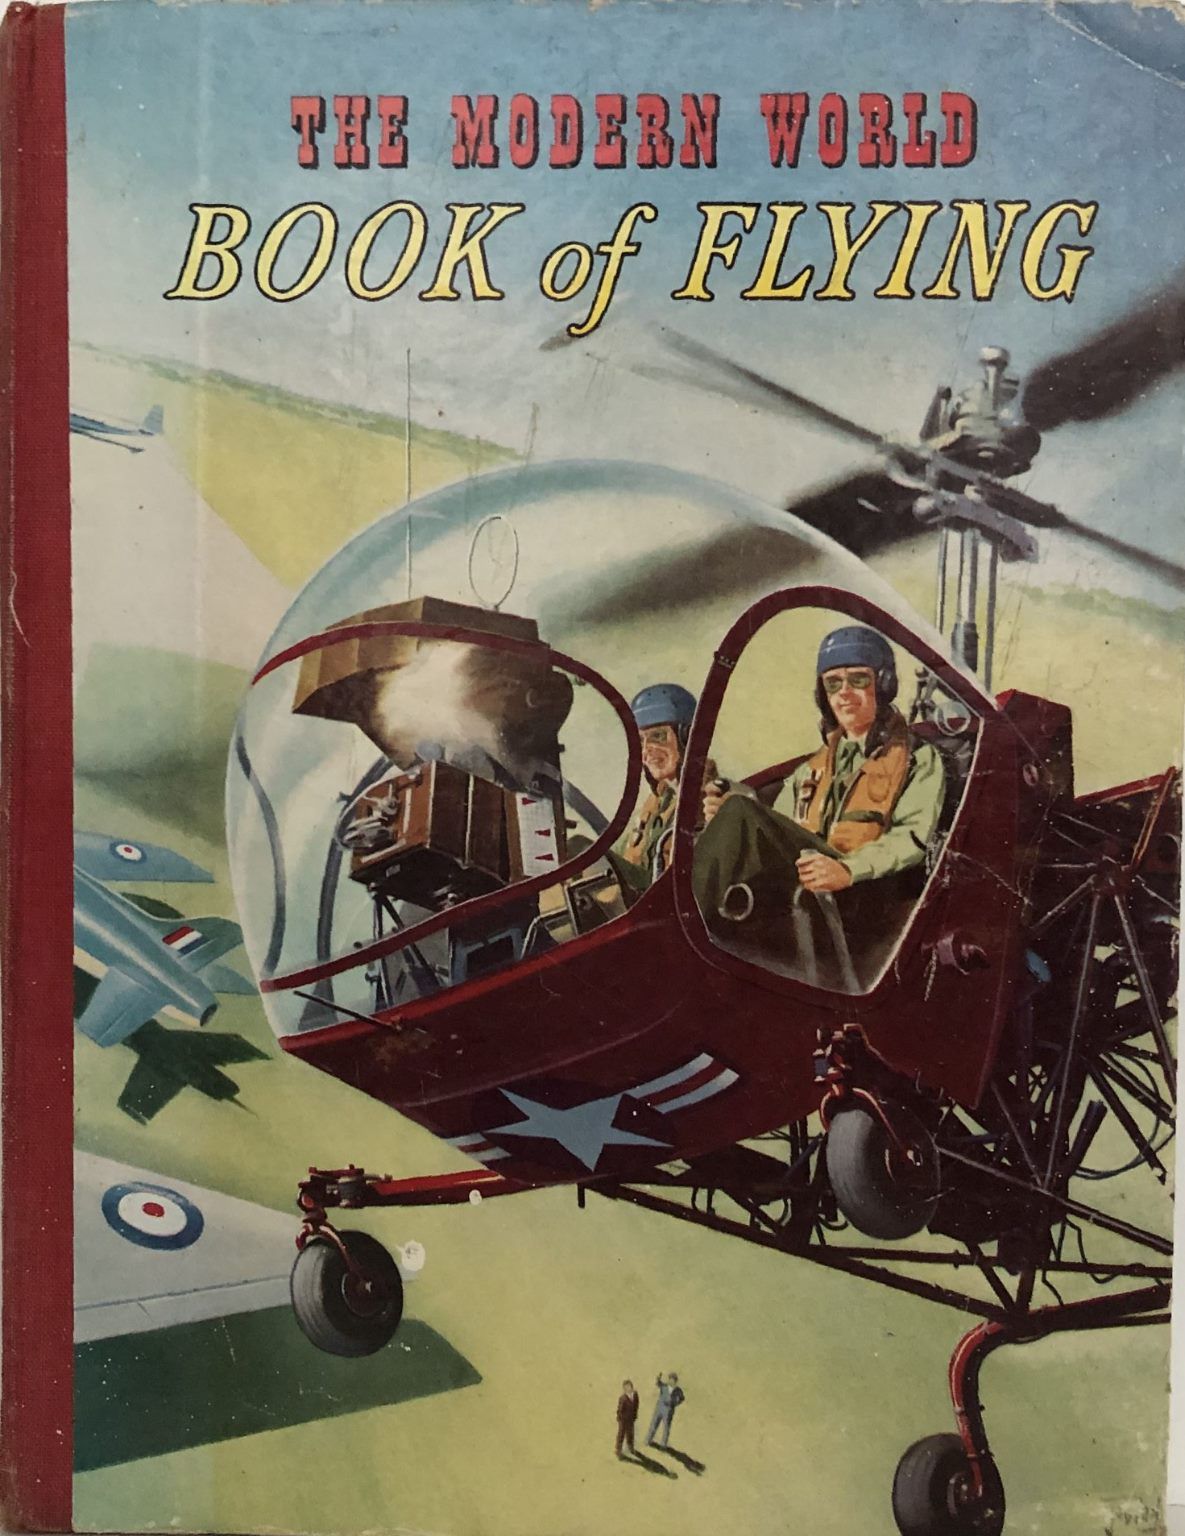 THE MODERN WORLD: Book of Flying